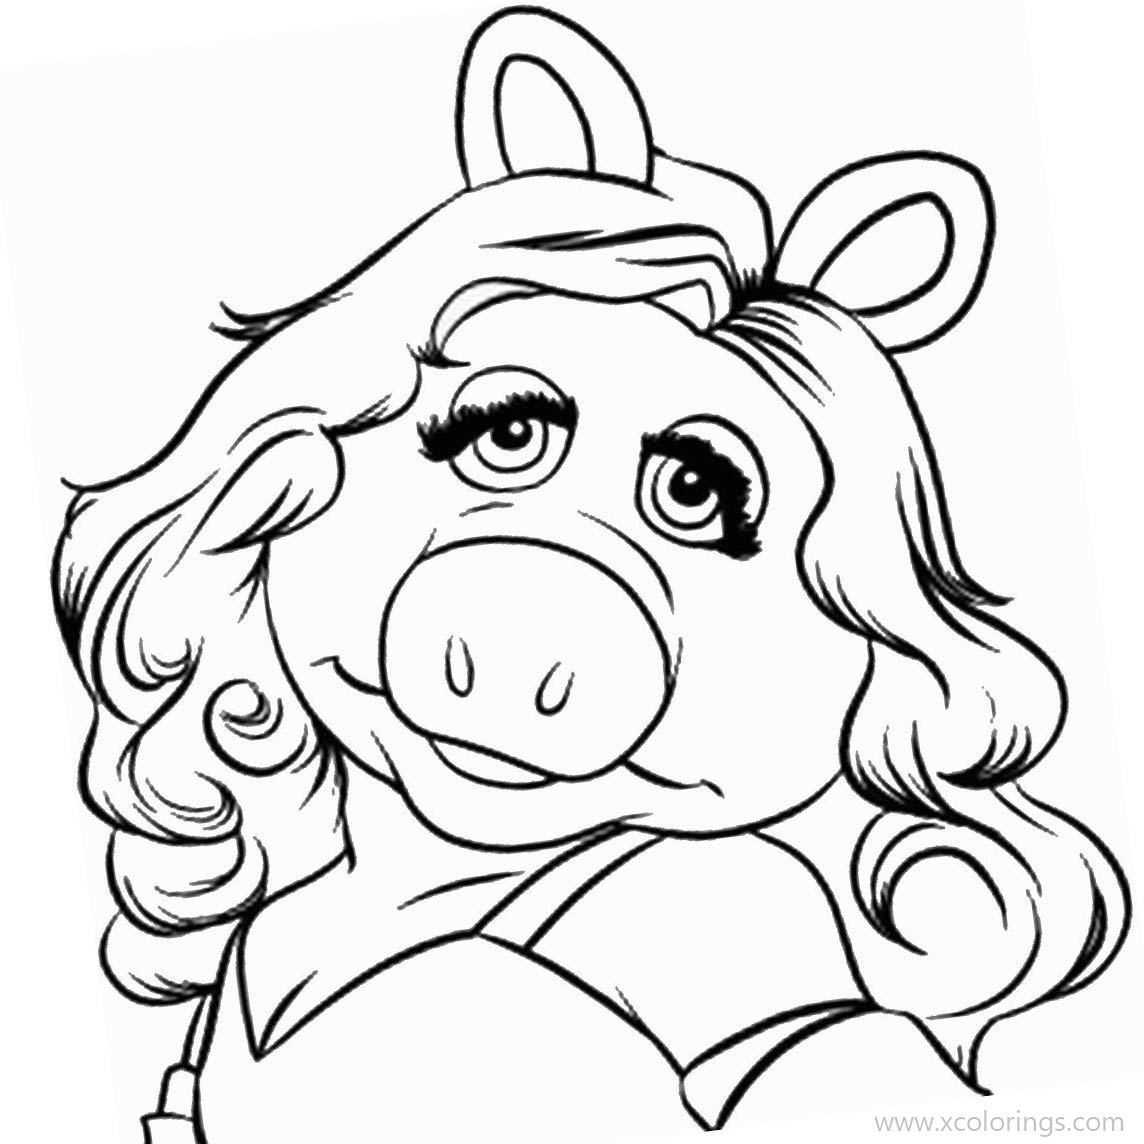 Miss Piggy from The Muppets Coloring Pages - XColorings.com